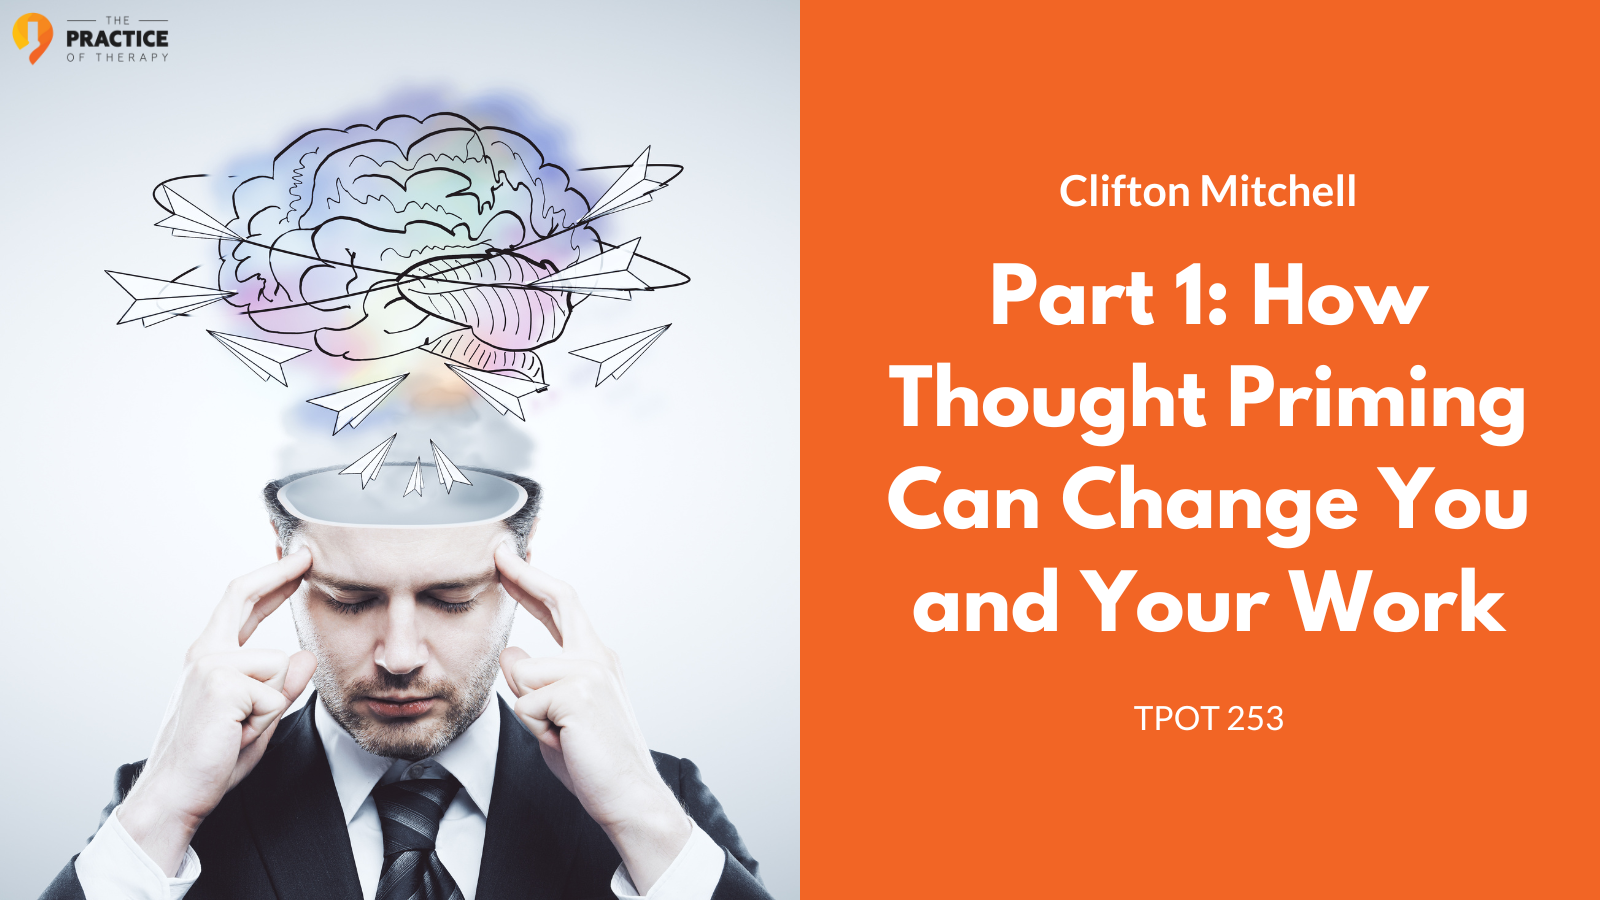 Part 1 How Thought Priming Can Change You and Your Work